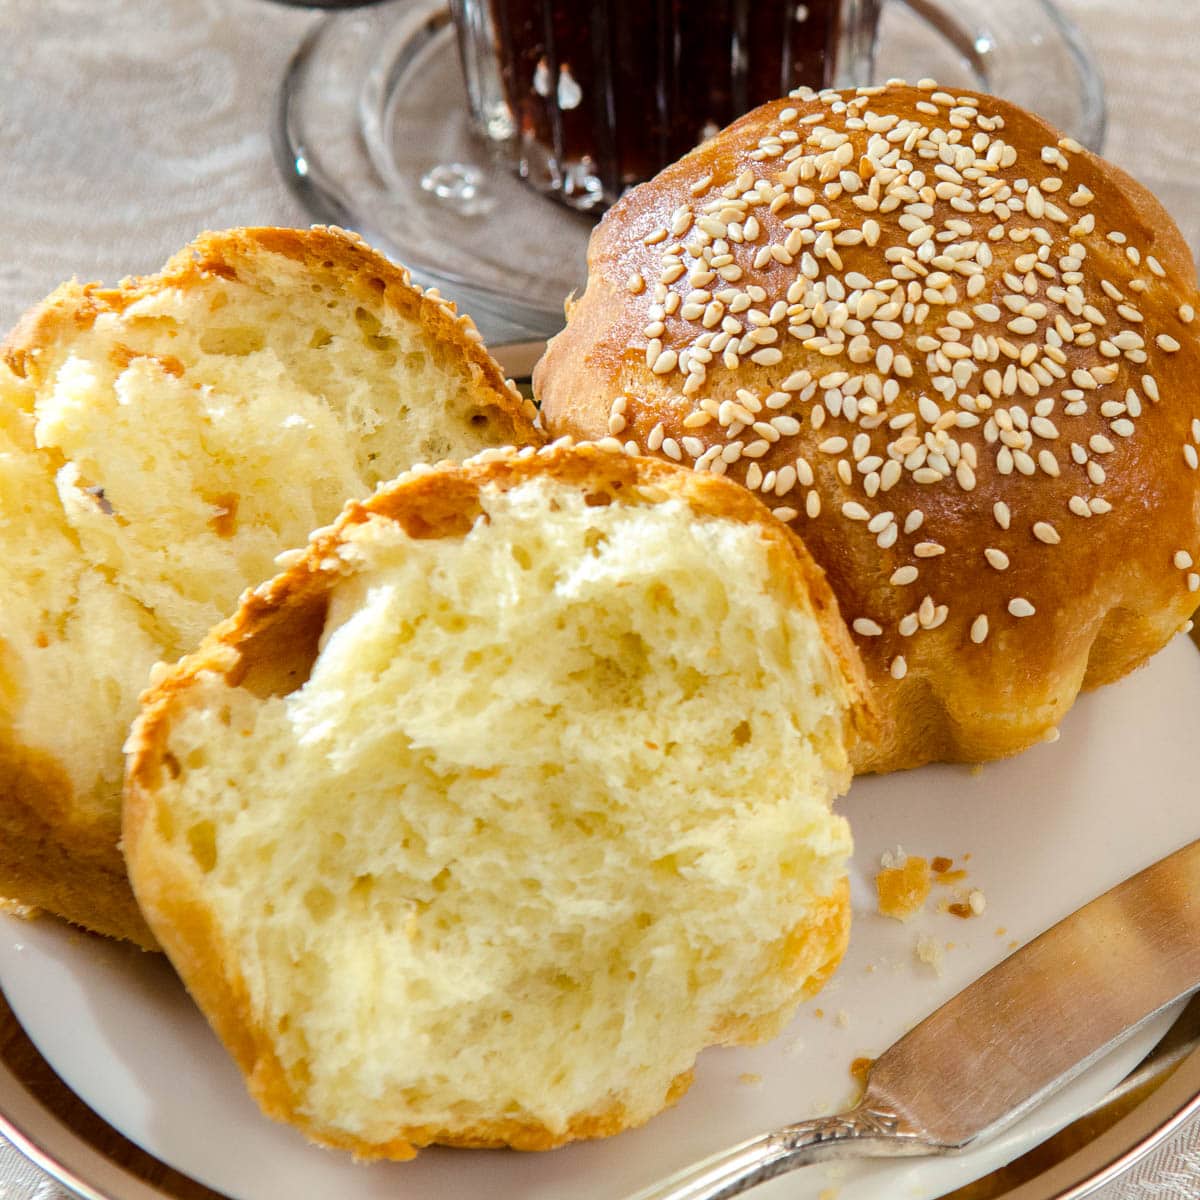 Two Brioche Rolls are on a plate with a jar of jam.